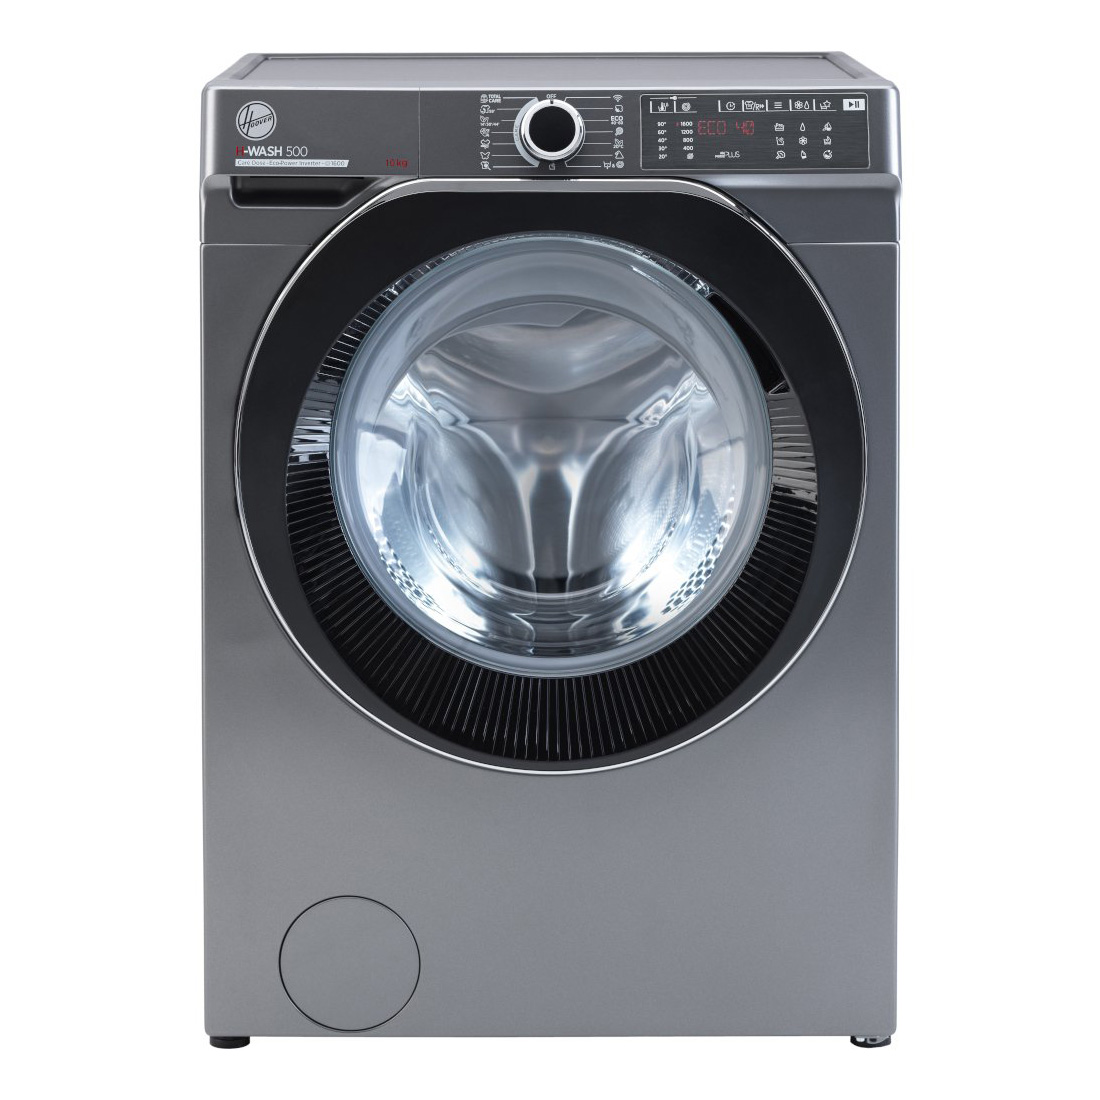 Image of Hoover HWDB610AMBCR Washing Machine in Graphite 1600rpm 10kg A Rated W